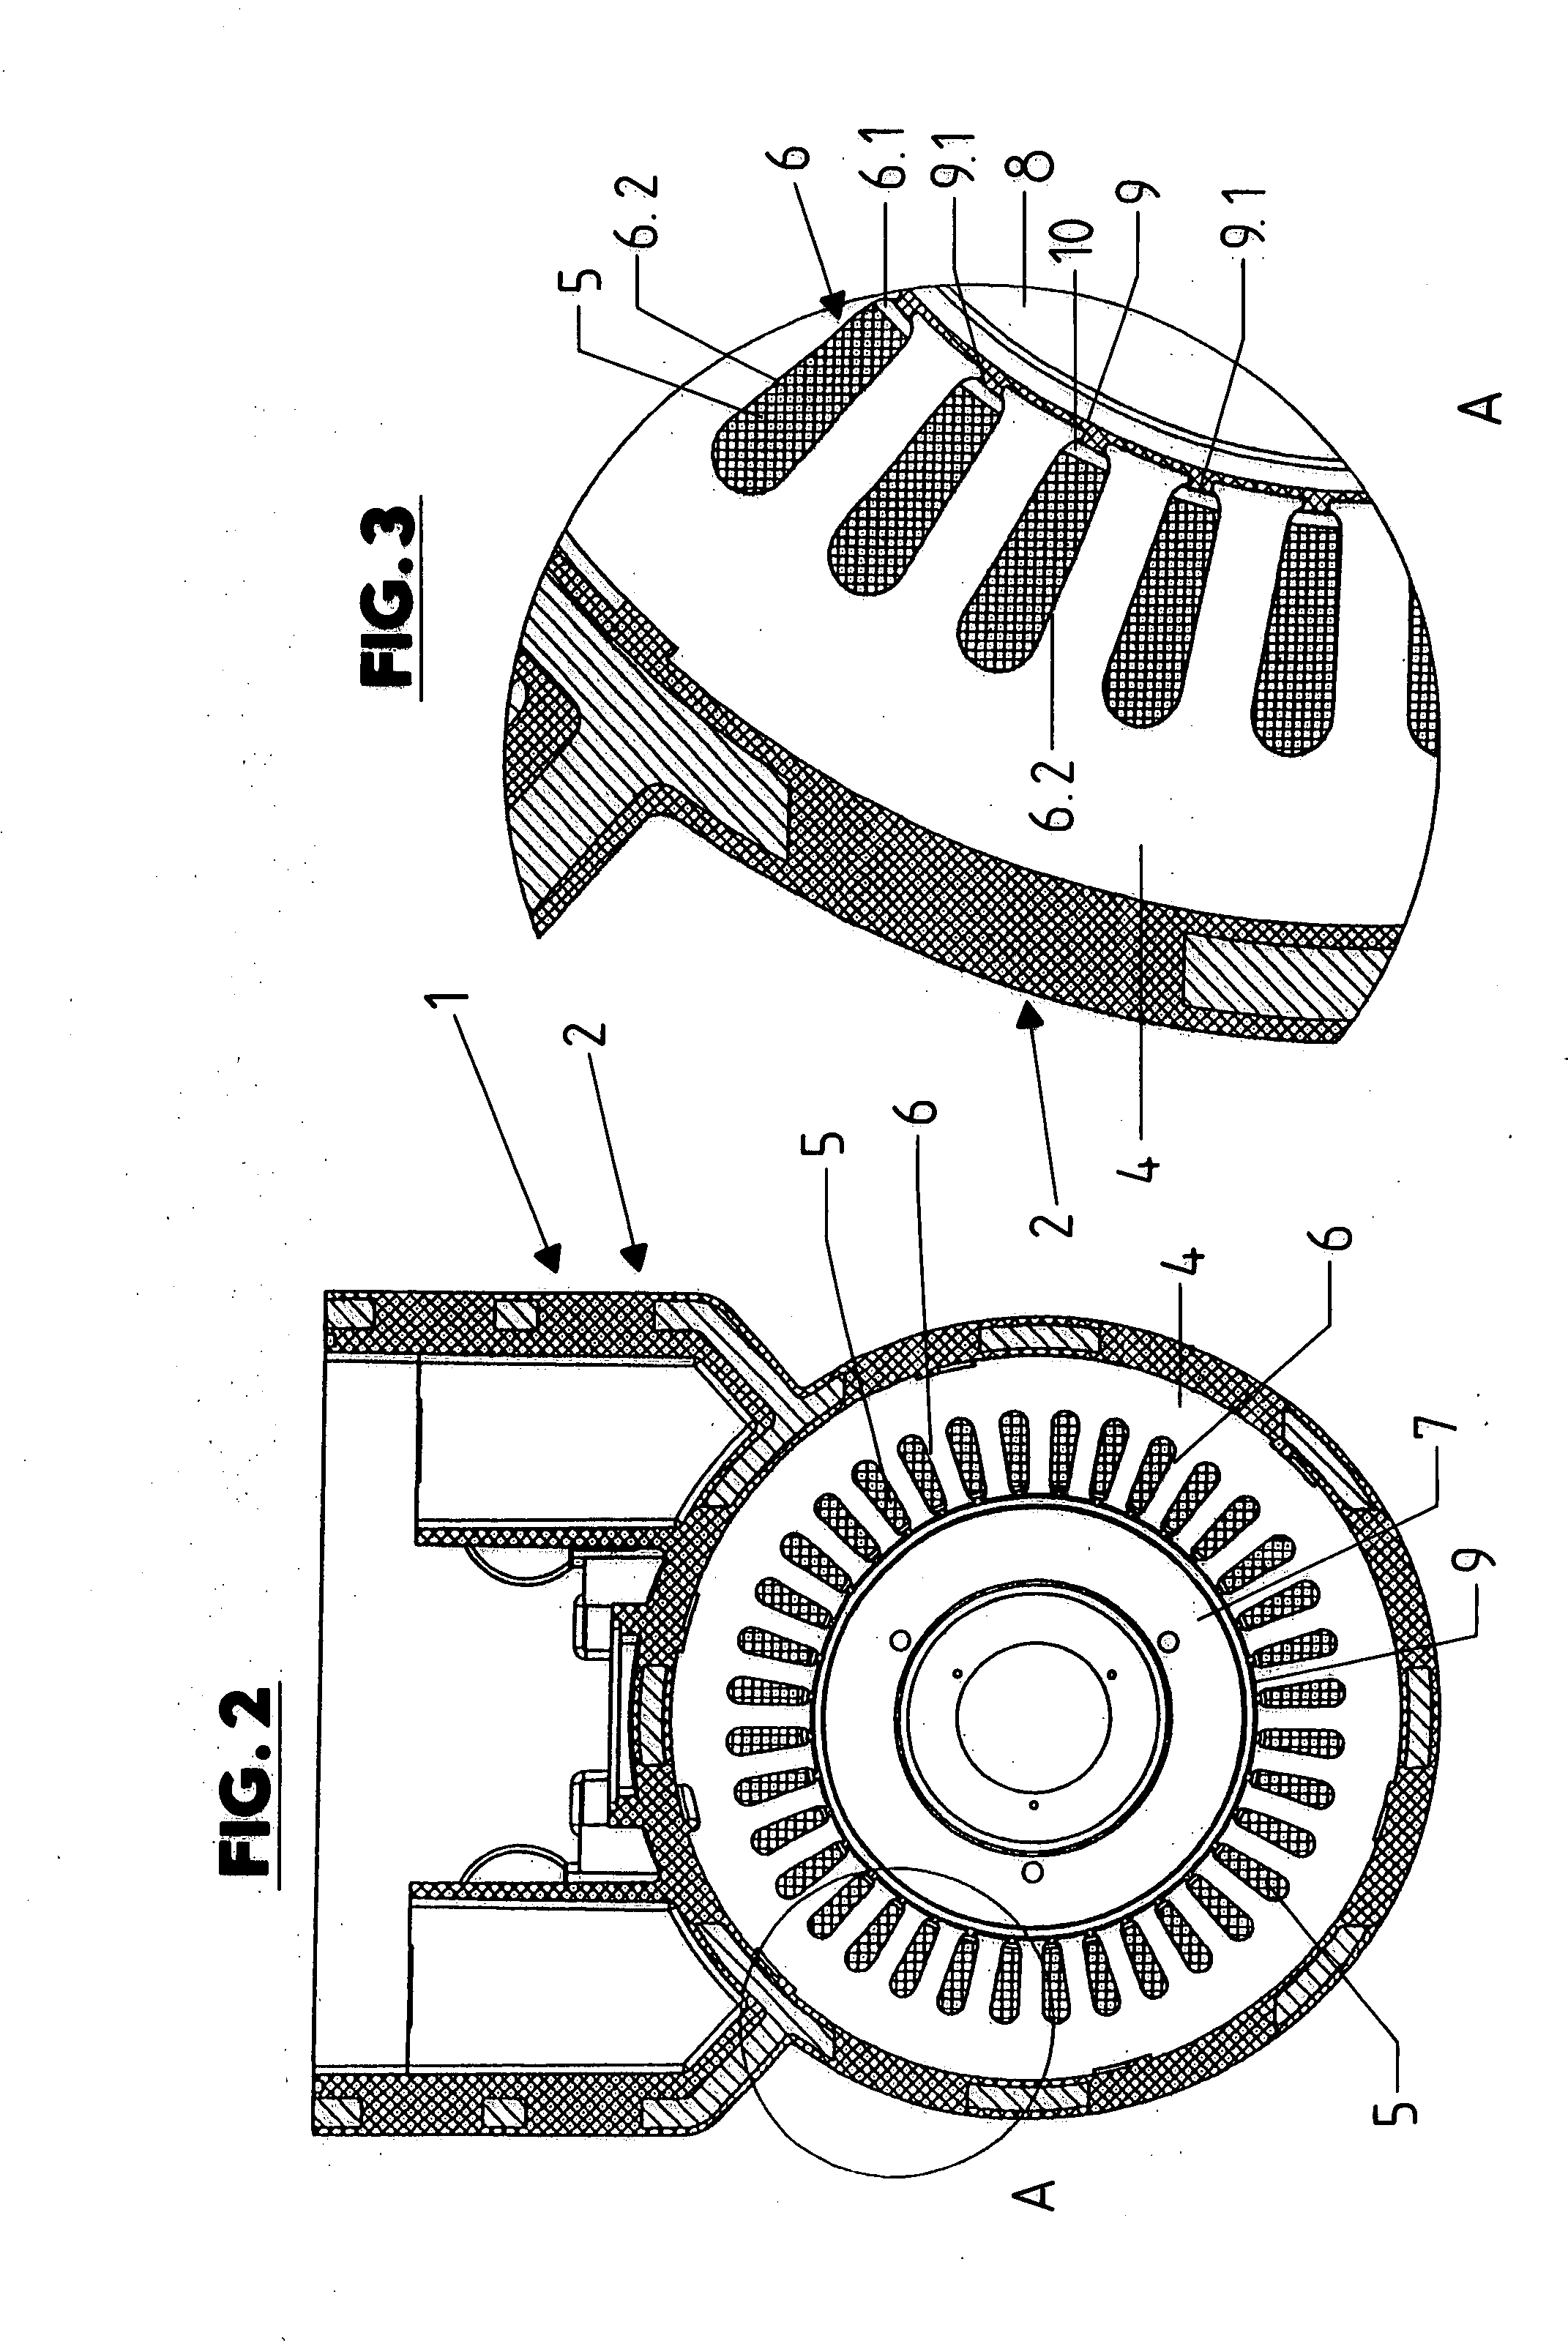 Method for manufacturing an electric machine and electric machine manufactured according to said method